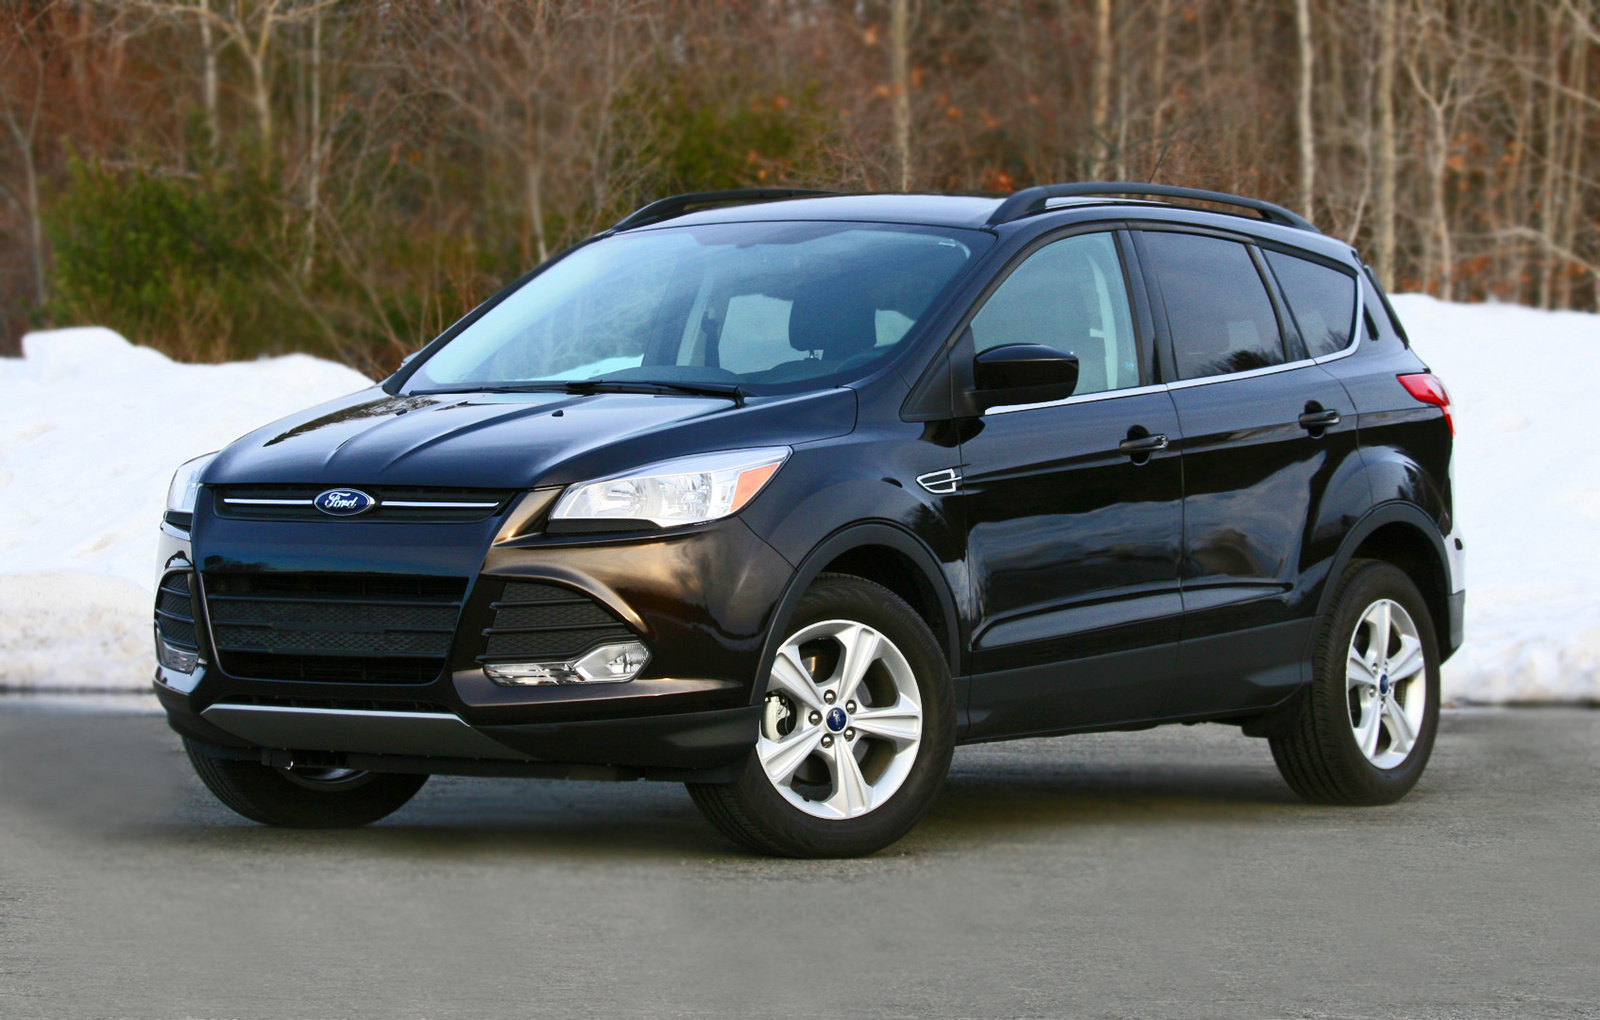 2013 Ford Escape: Prices, Reviews & Pictures - CarGurus